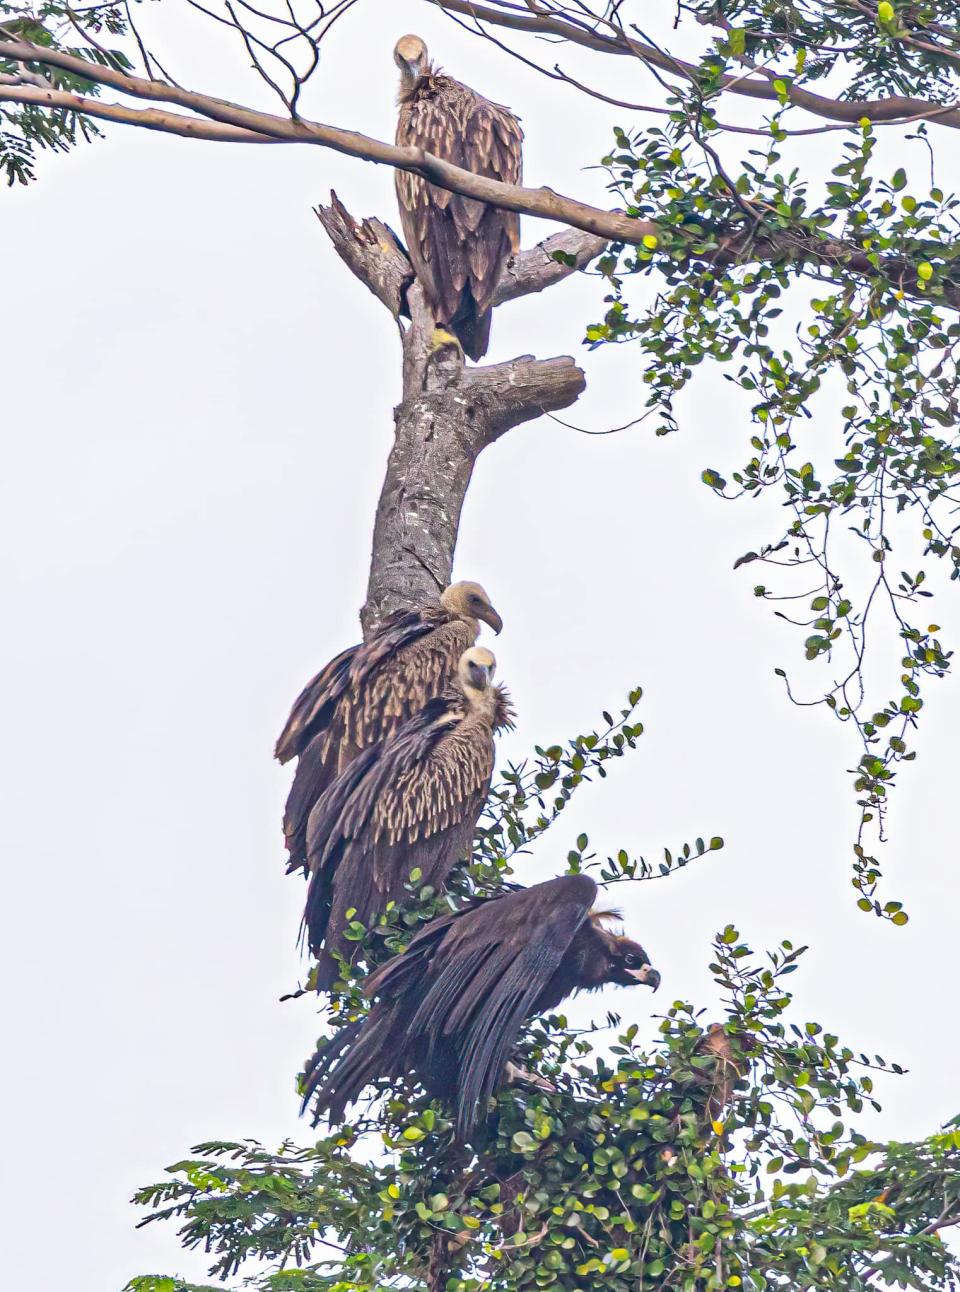 Himalayan vultures and a solitary cinereous vulture (bottom) in Singapore Botanic Gardens, 30 Dec 2021. (Photo: Shiu Ling/Facebook)